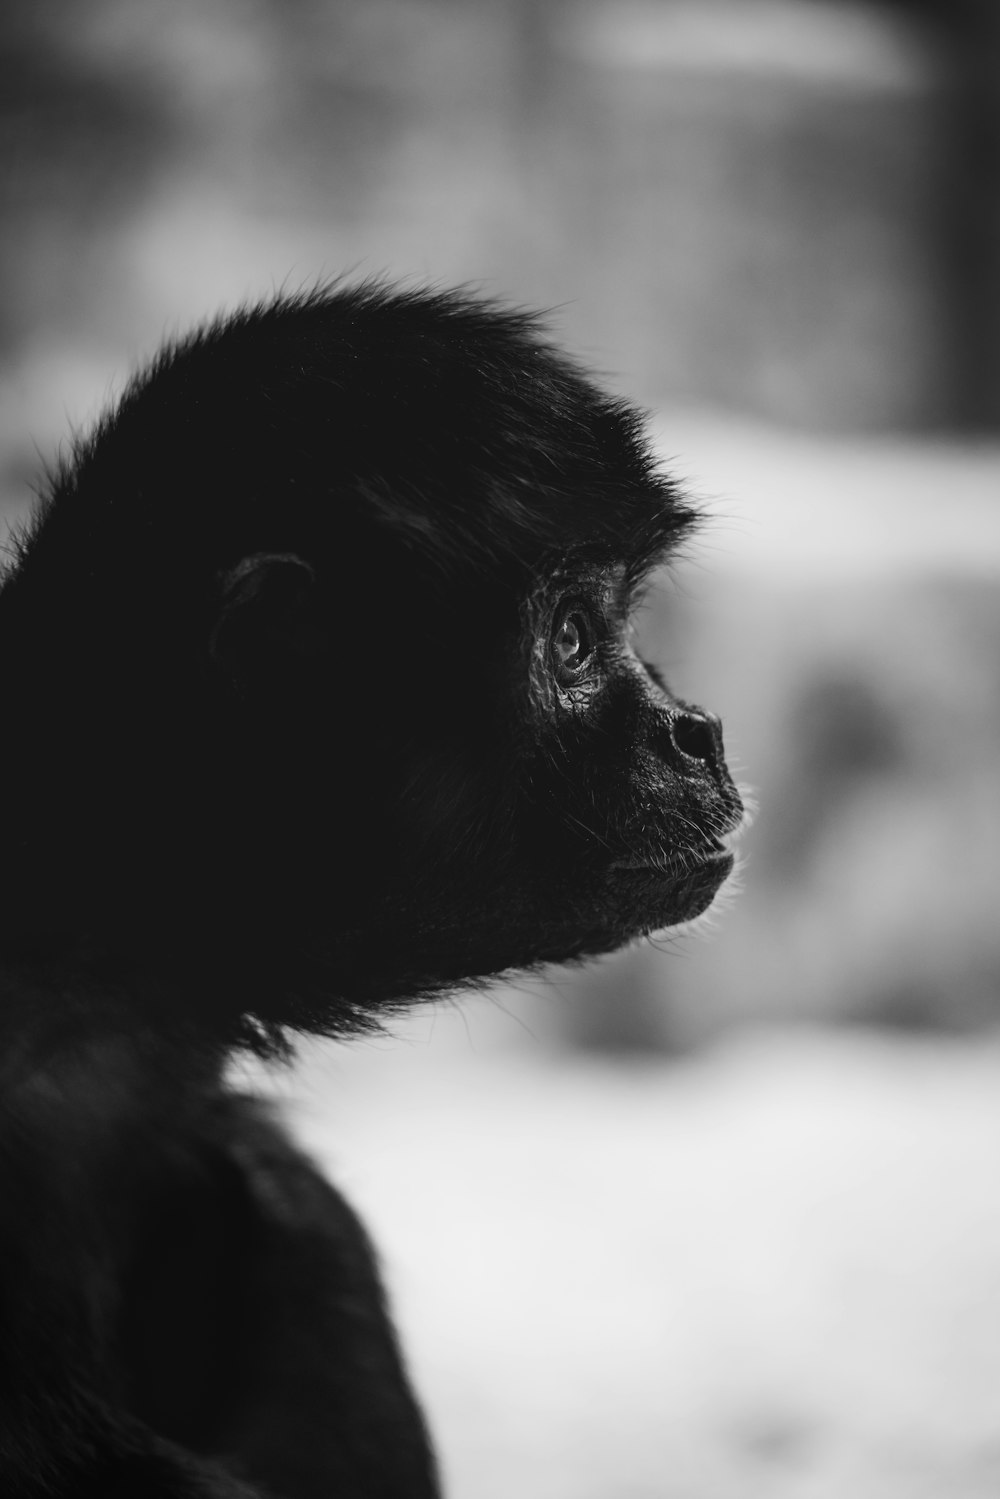 a black and white photo of a monkey